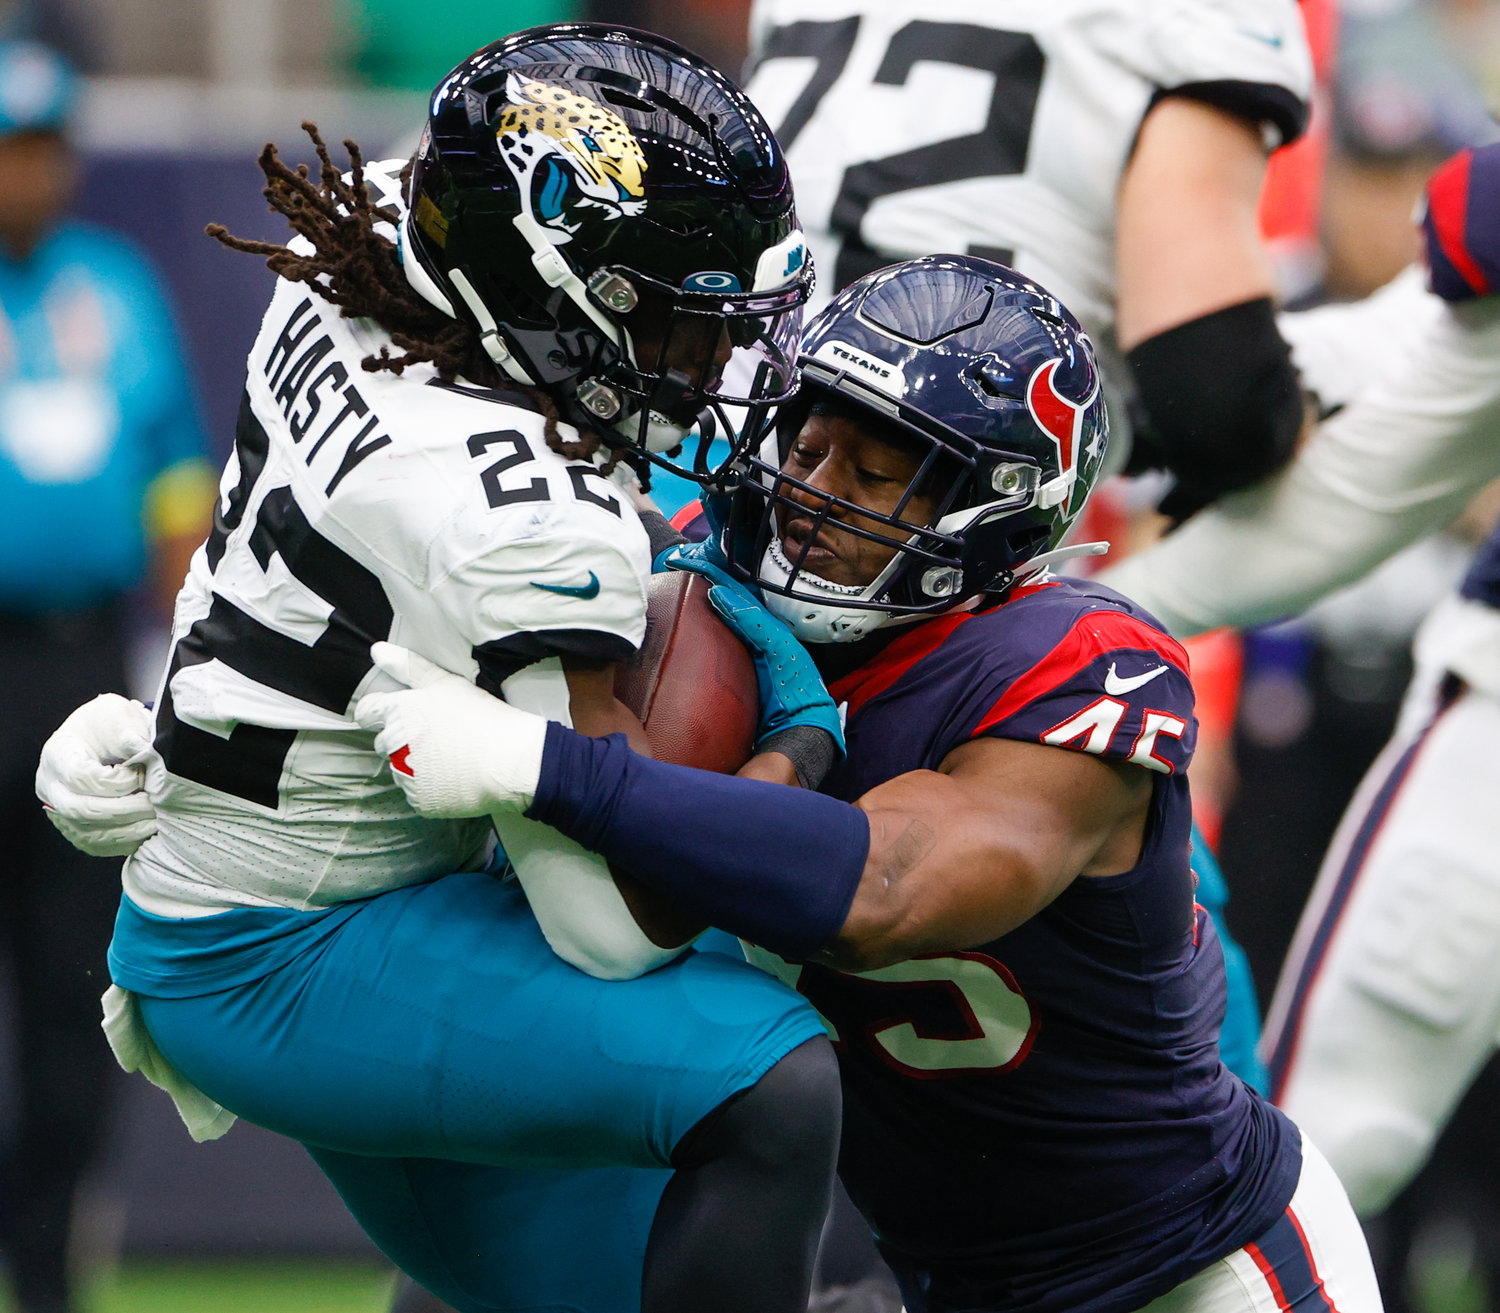 Texans linebacker Ogbonnia Okoronkwo (45) stops Jaguars running back JaMycal Hasty (22) in the backfield for a loss during an NFL game between the Houston Texans and the Jacksonville Jaguars on Jan. 1, 2023 in Houston. The Jaguars won, 31-3.